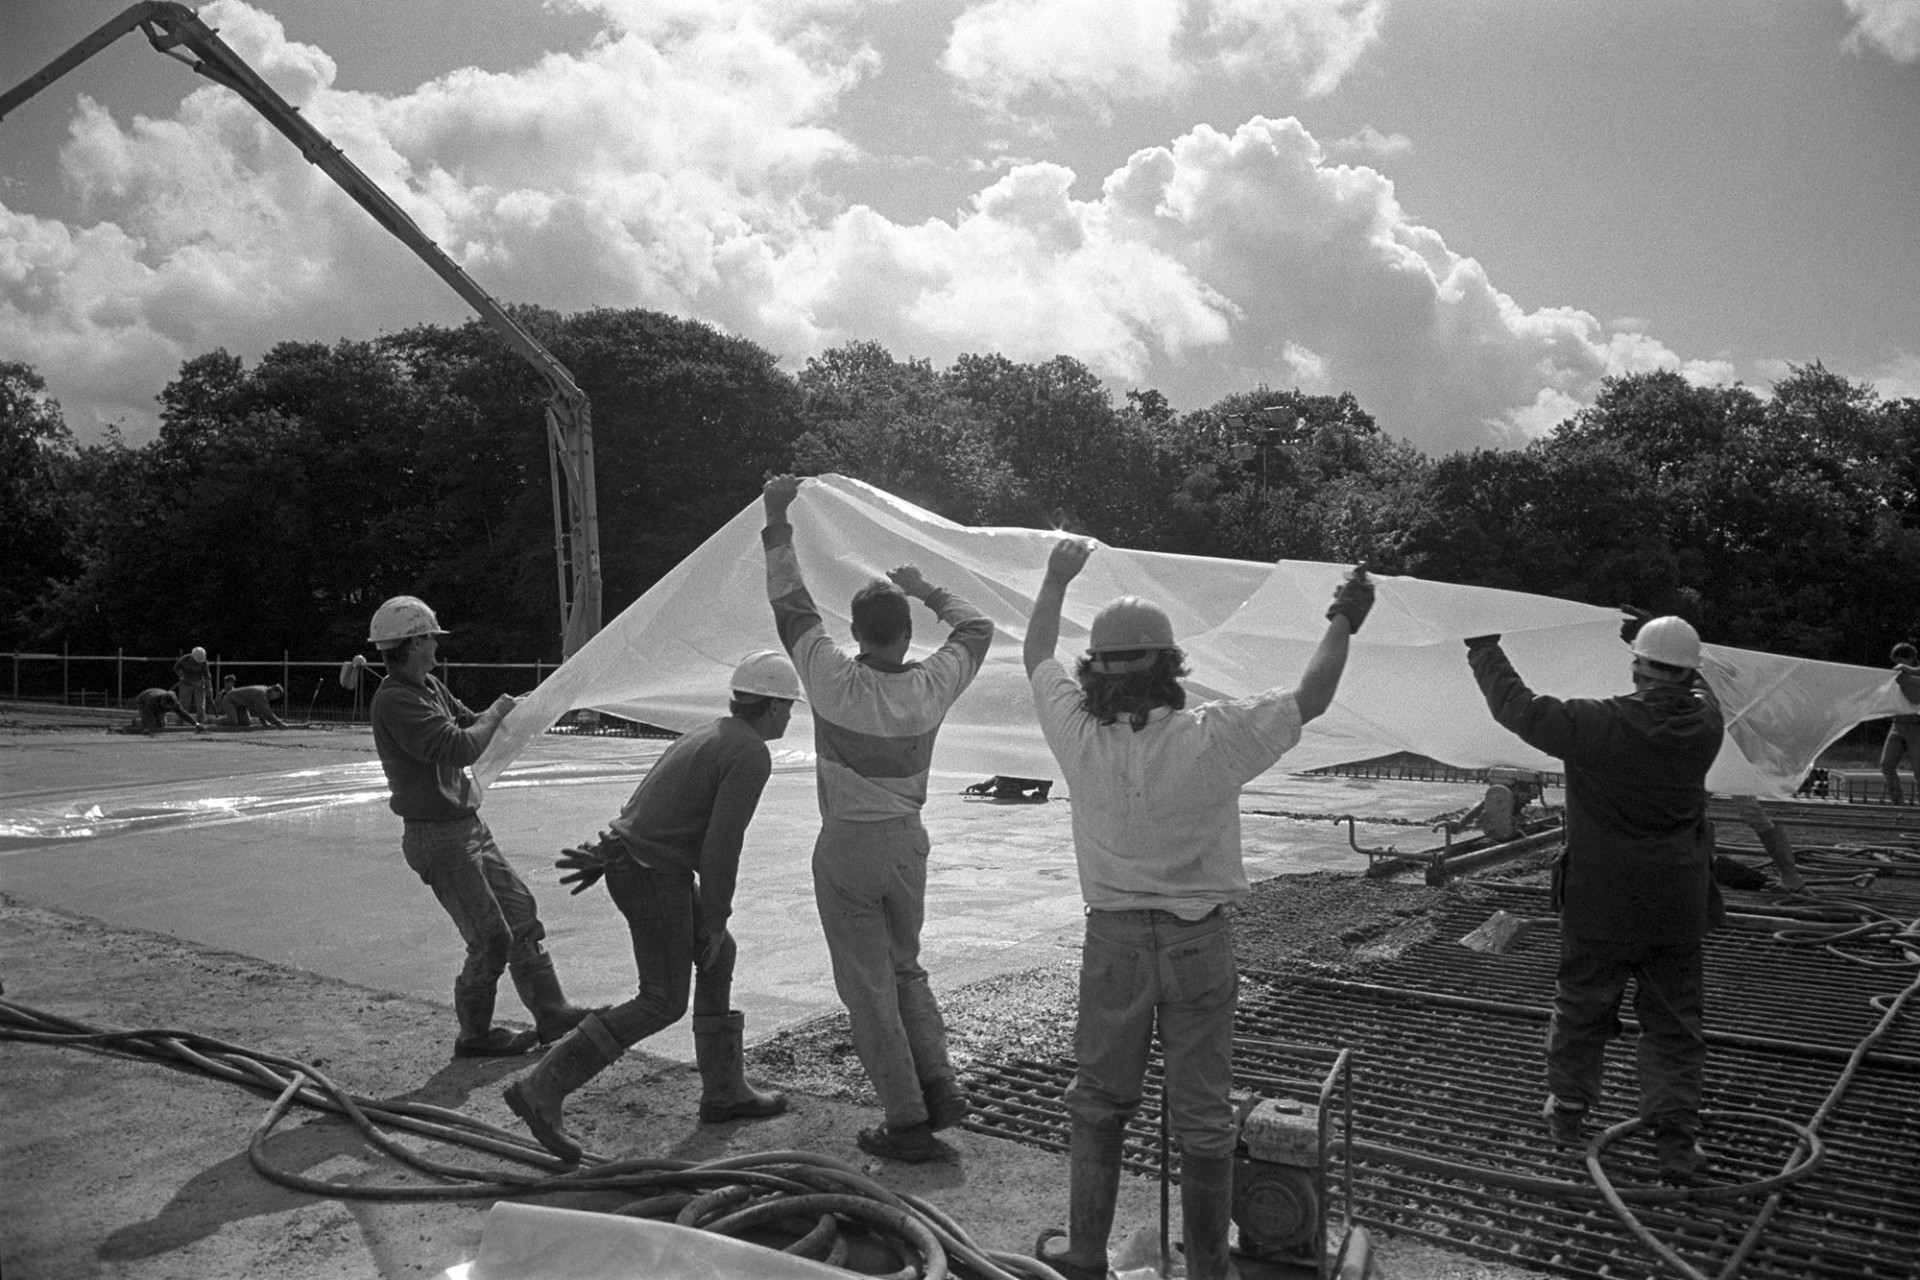 Men building new link road laying polythene sheet on top of wet cement, bright sun. 
[Men laying a polythene sheet over newly laid concrete on the new North Devon Link Road or A361 near South Molton. The crane which pumped in the concrete is visible in the background.]